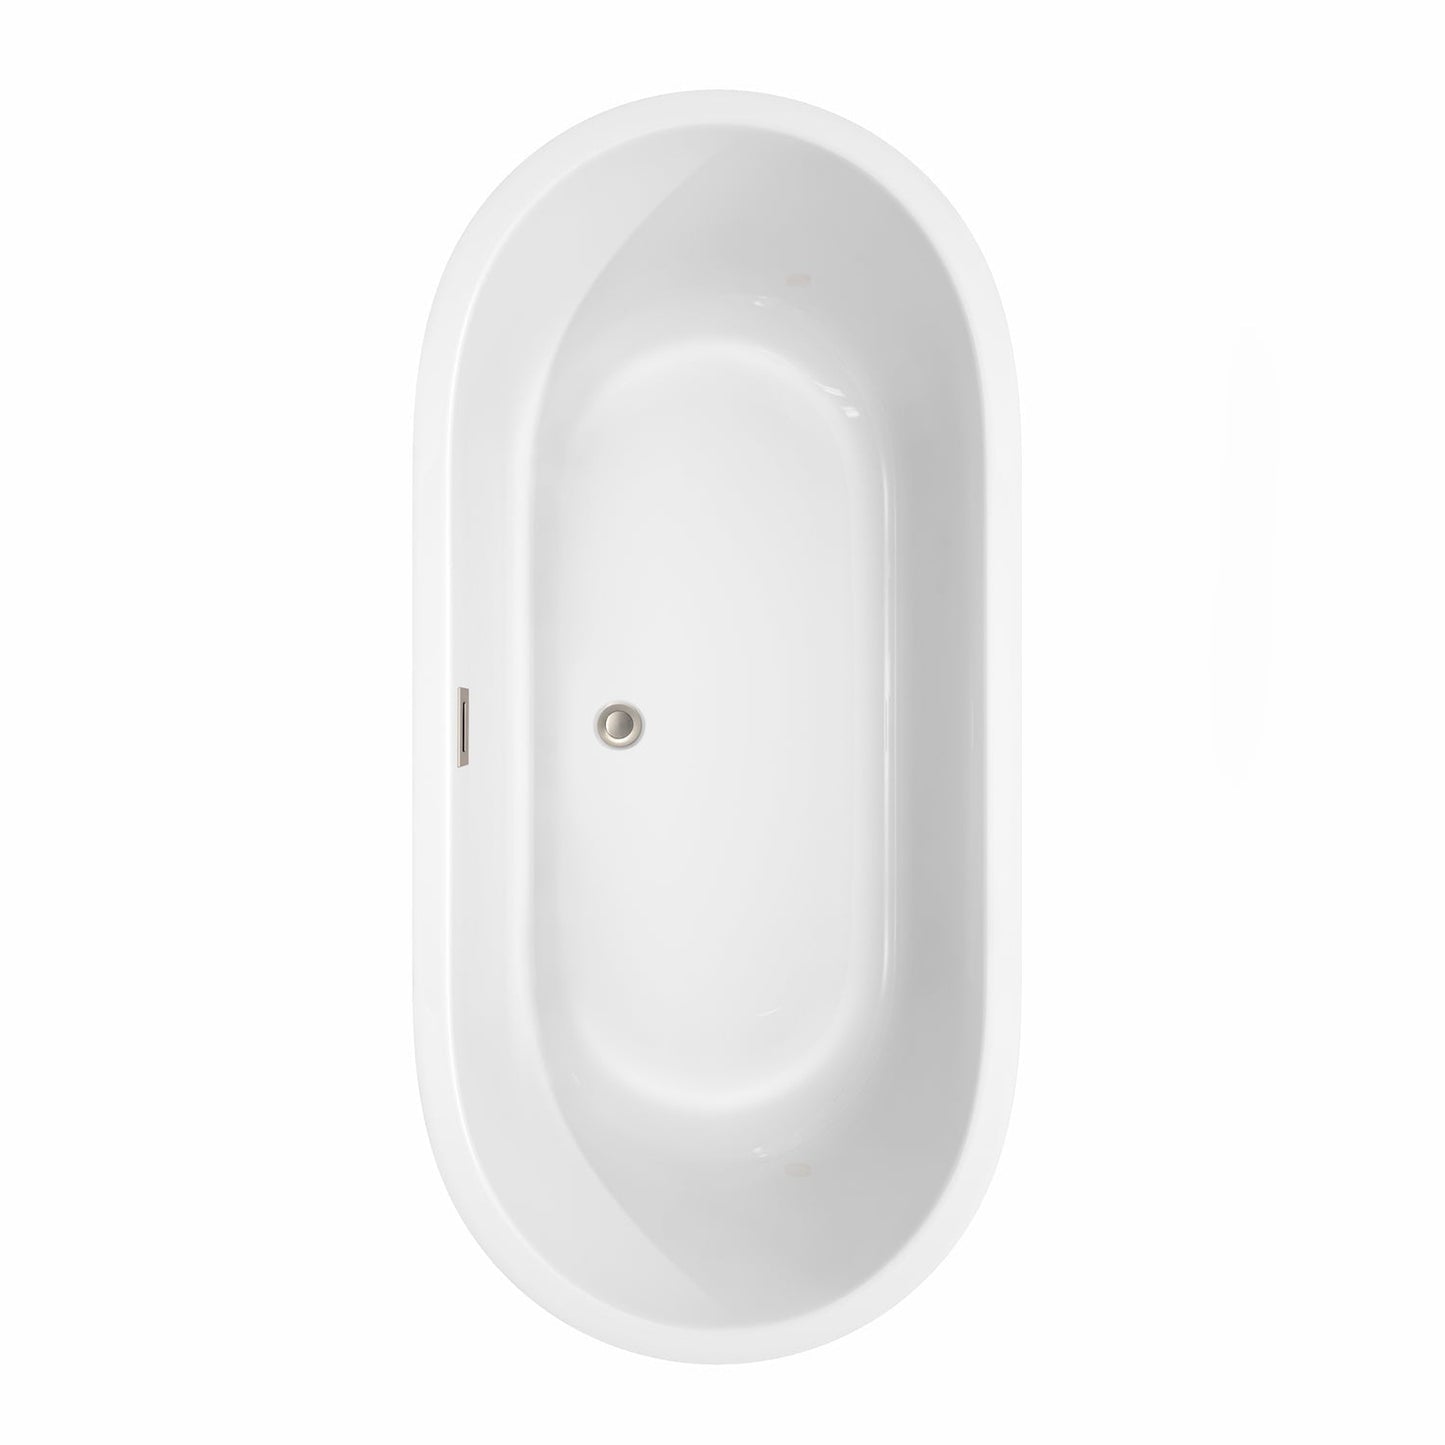 Wyndham Collection Juliette 67" Freestanding Bathtub in White With Brushed Nickel Drain and Overflow Trim